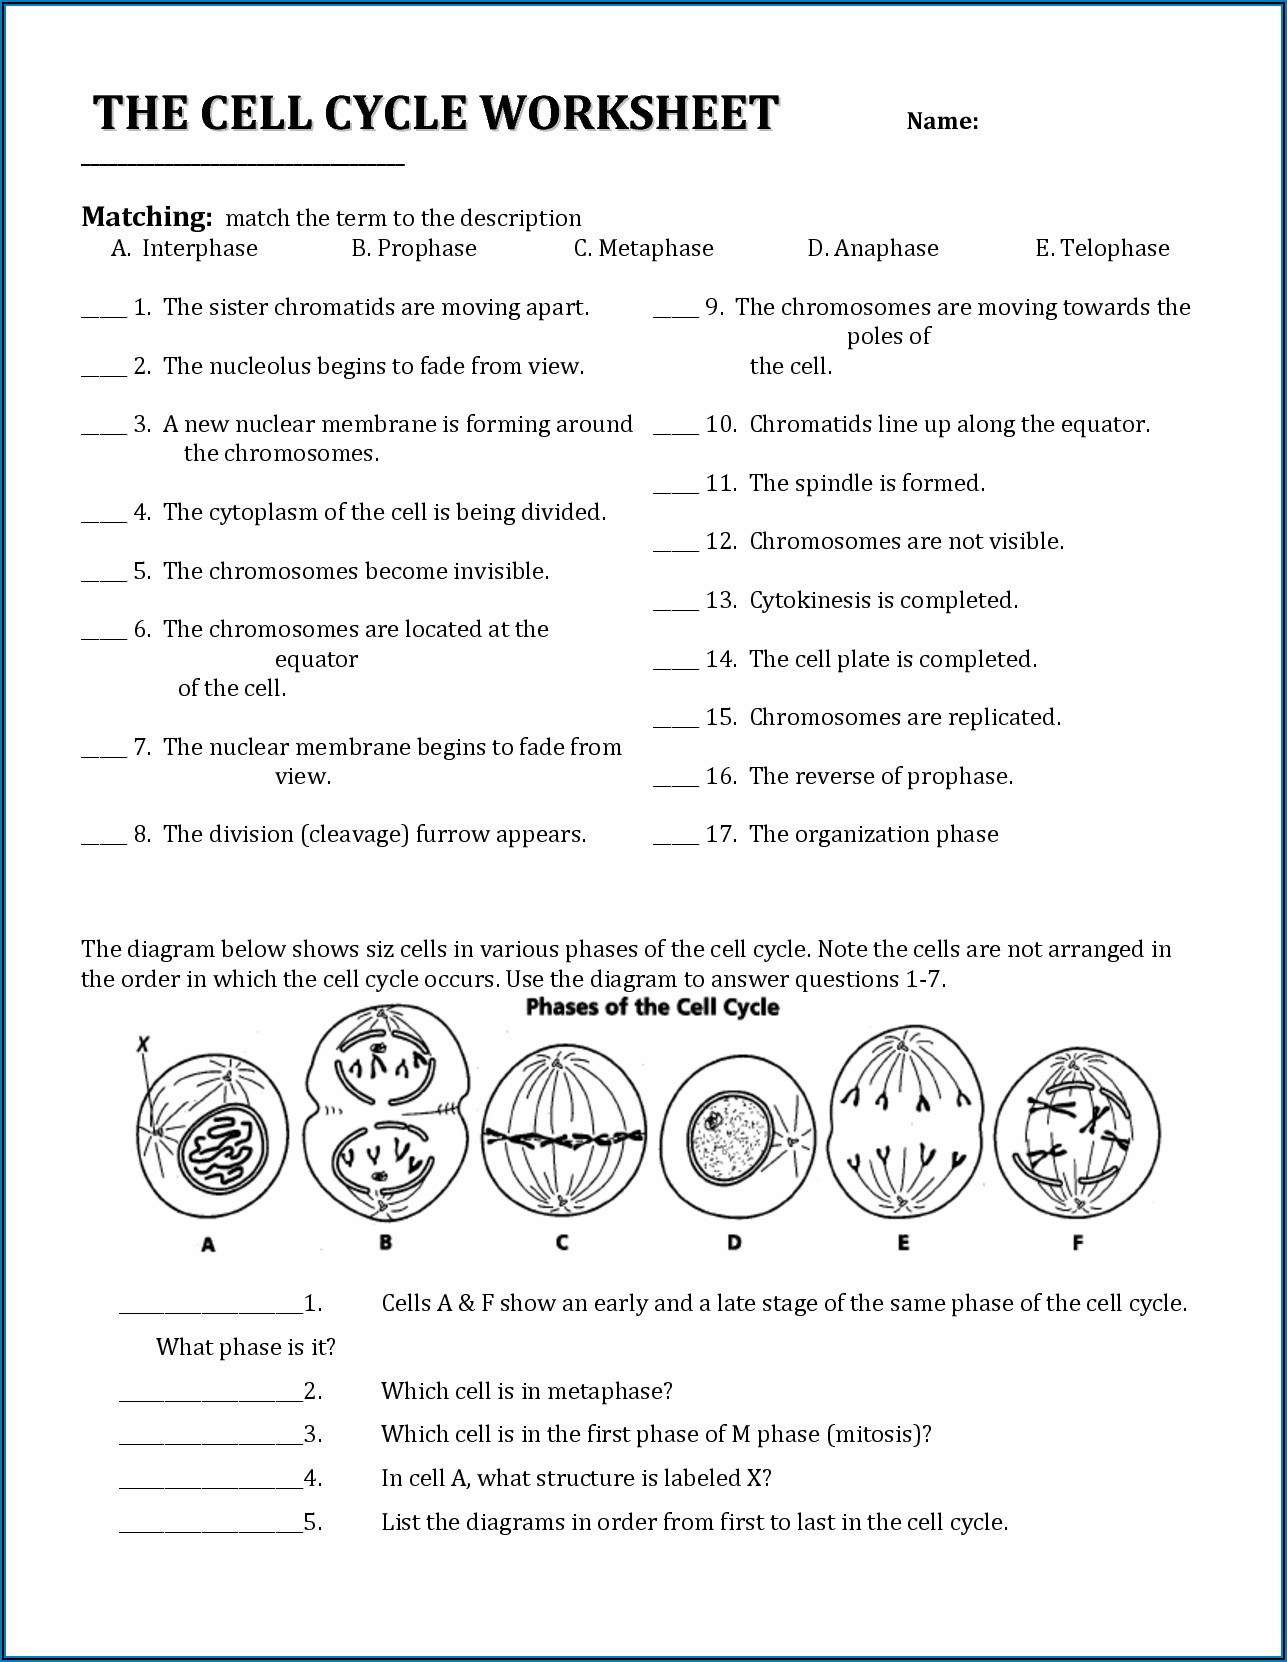 Eukaryotic Cell Cycle And Cancer Worksheet Answers